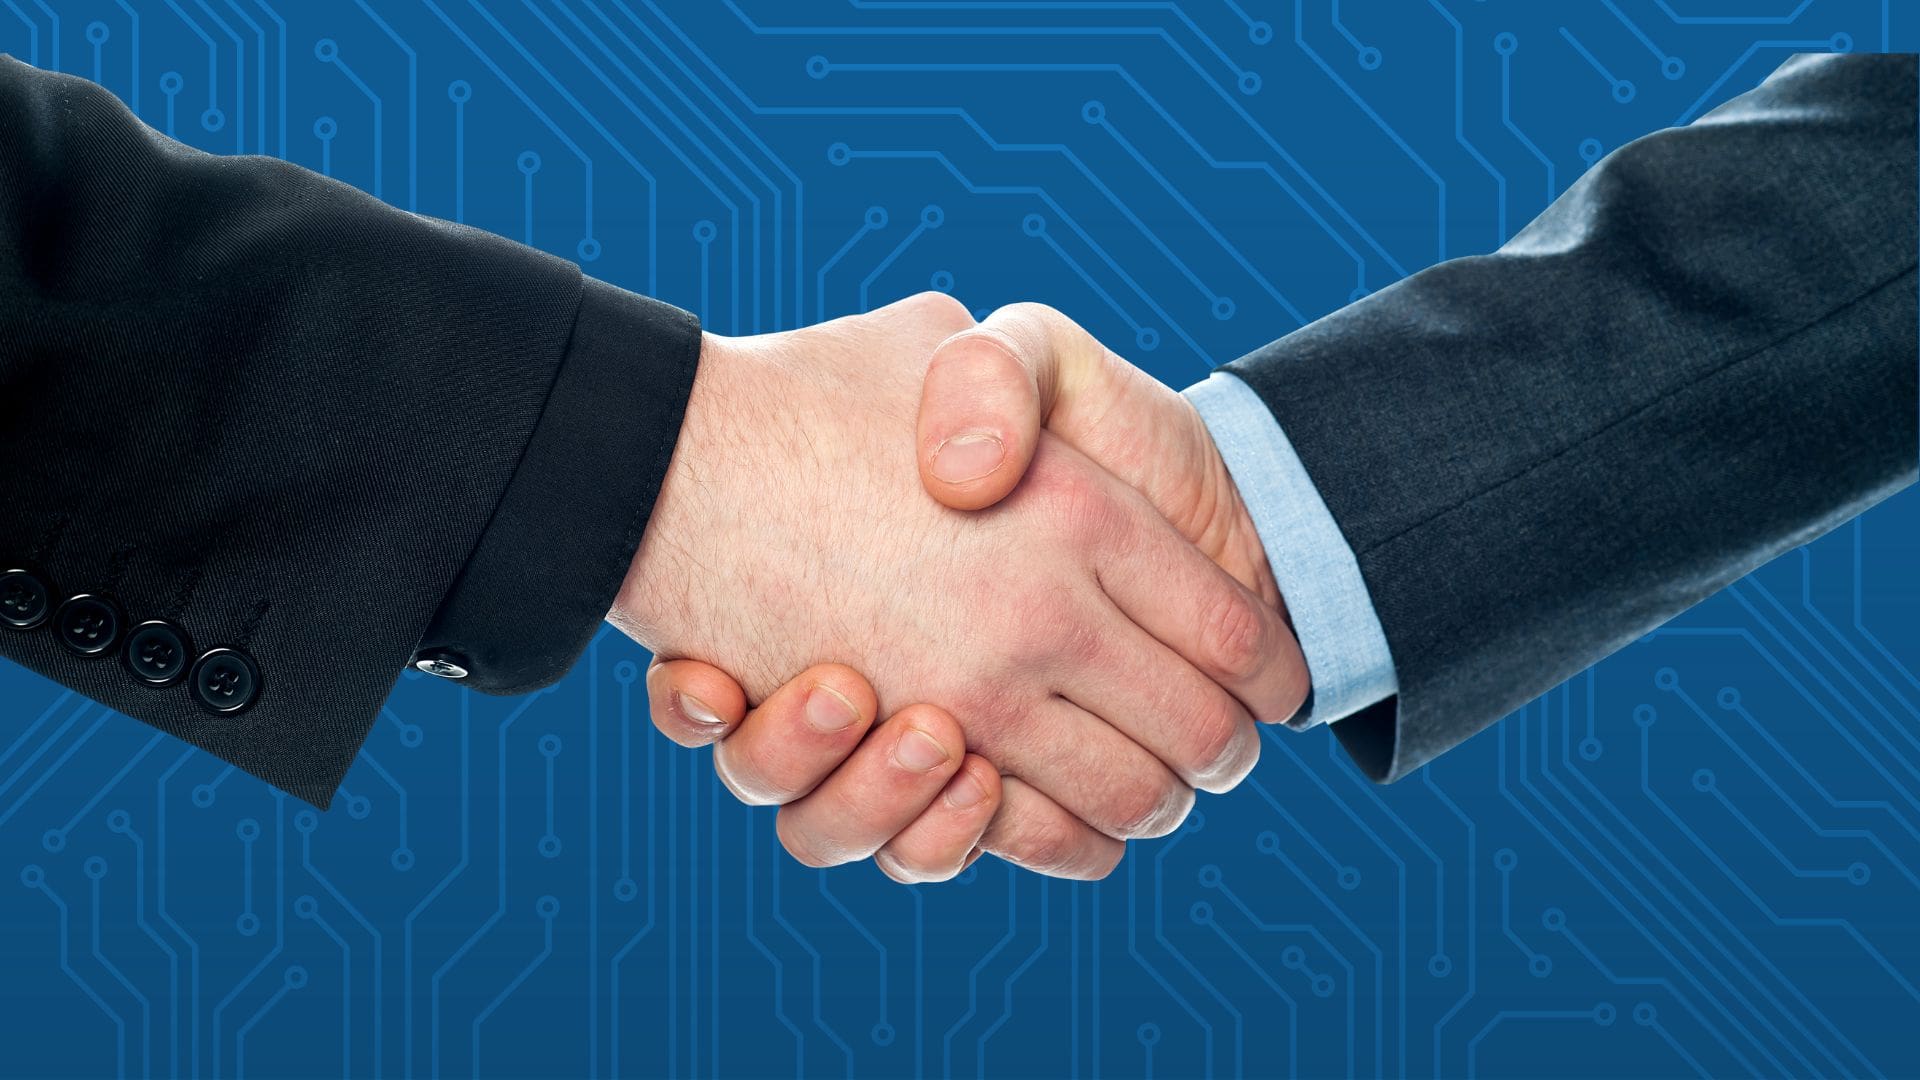 Essential Considerations for Successful IT Outsourcing Relationships